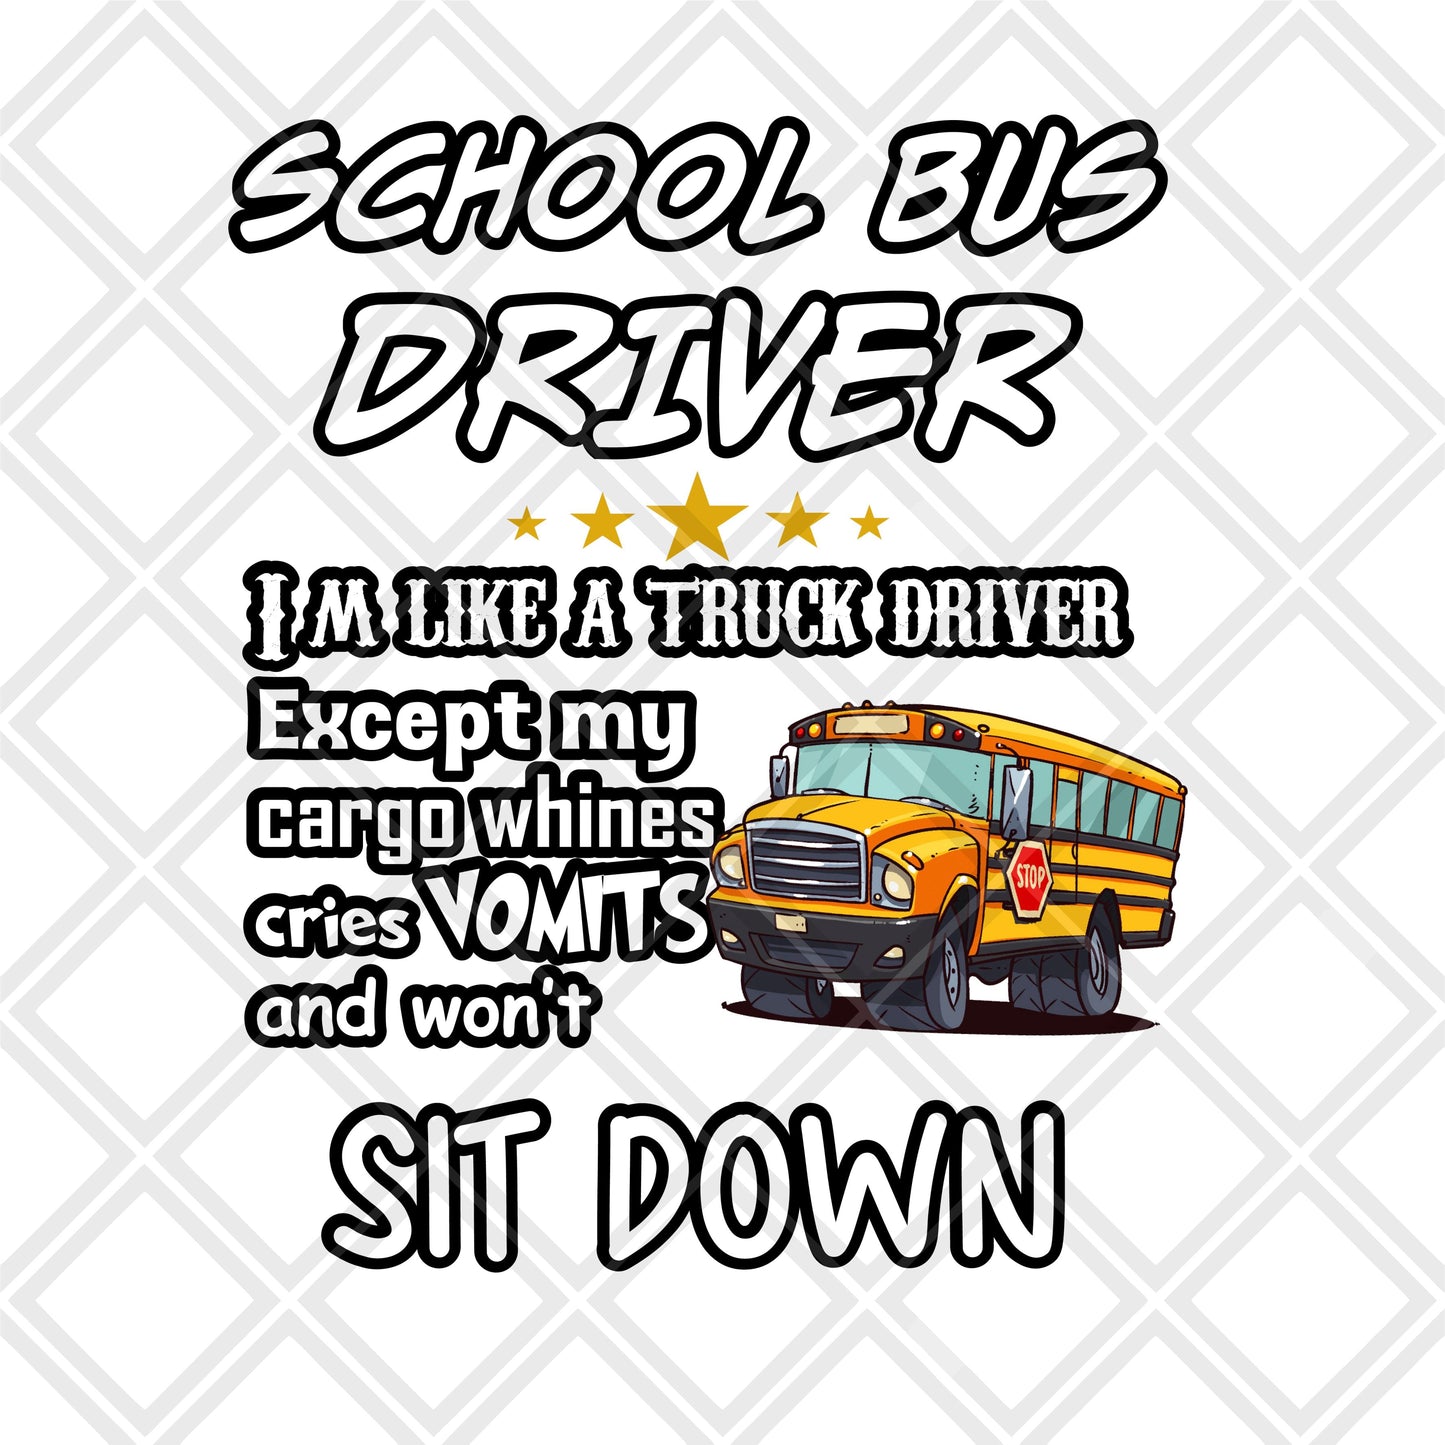 School Bus Driver Im like a truck driver except my cargo whines DTF TRANSFERPRINT TO ORDER